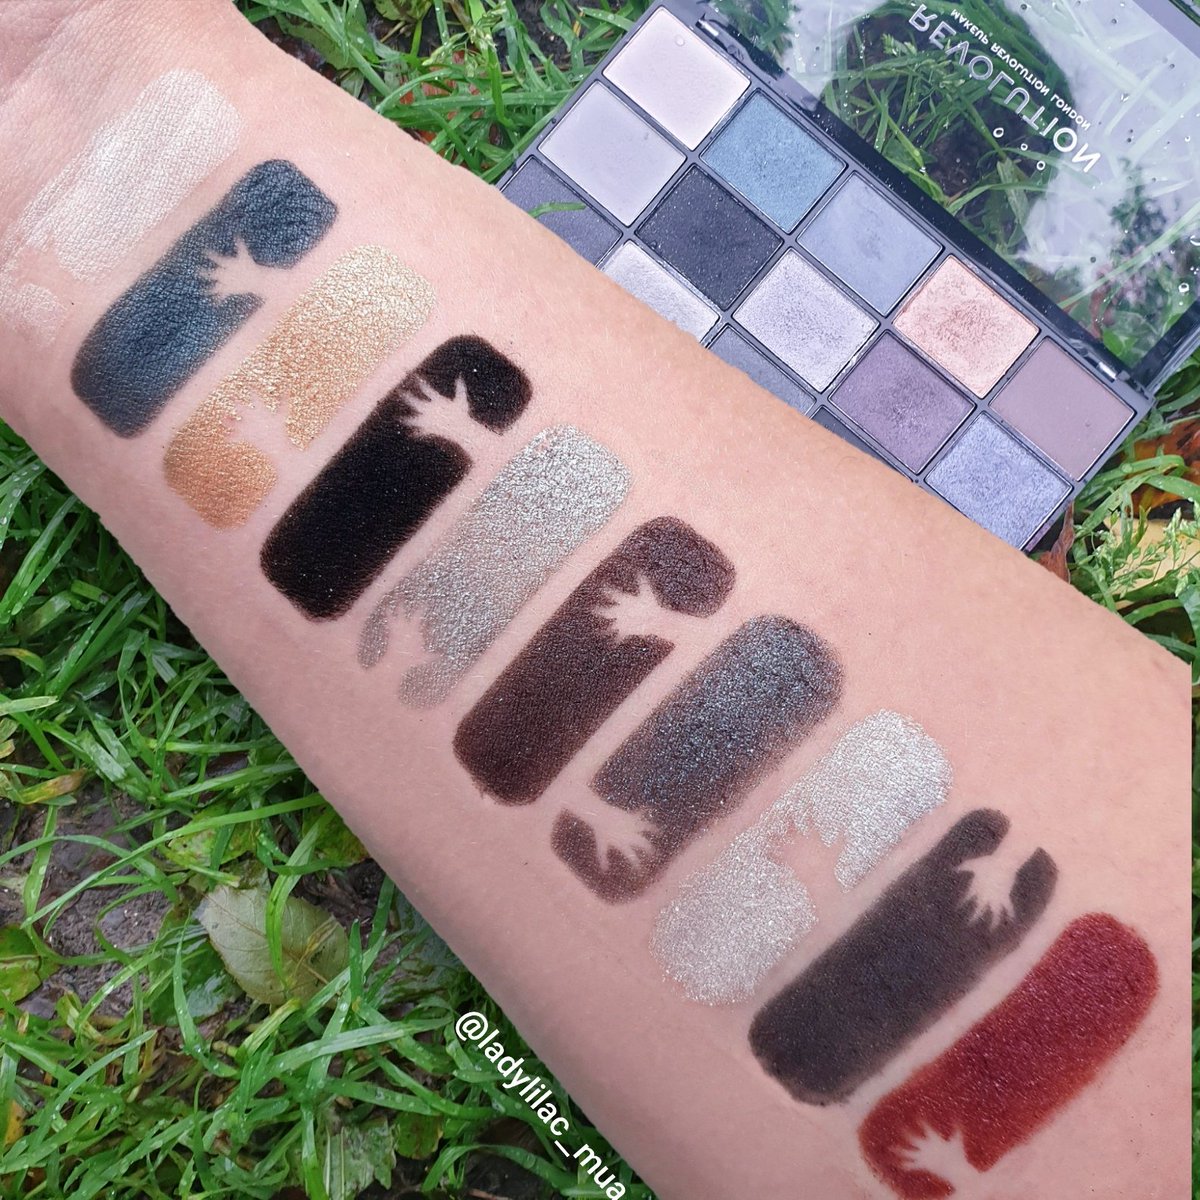 @MakeupRVLTN Reloaded Jewelled and Blackout Palettes & Swatches 👀💎🖤
#makeuprevolution #makeup #eyeshadow #eyeshadowpalette #makeupobsession #beautiful #swatches #swatch #swatchporn